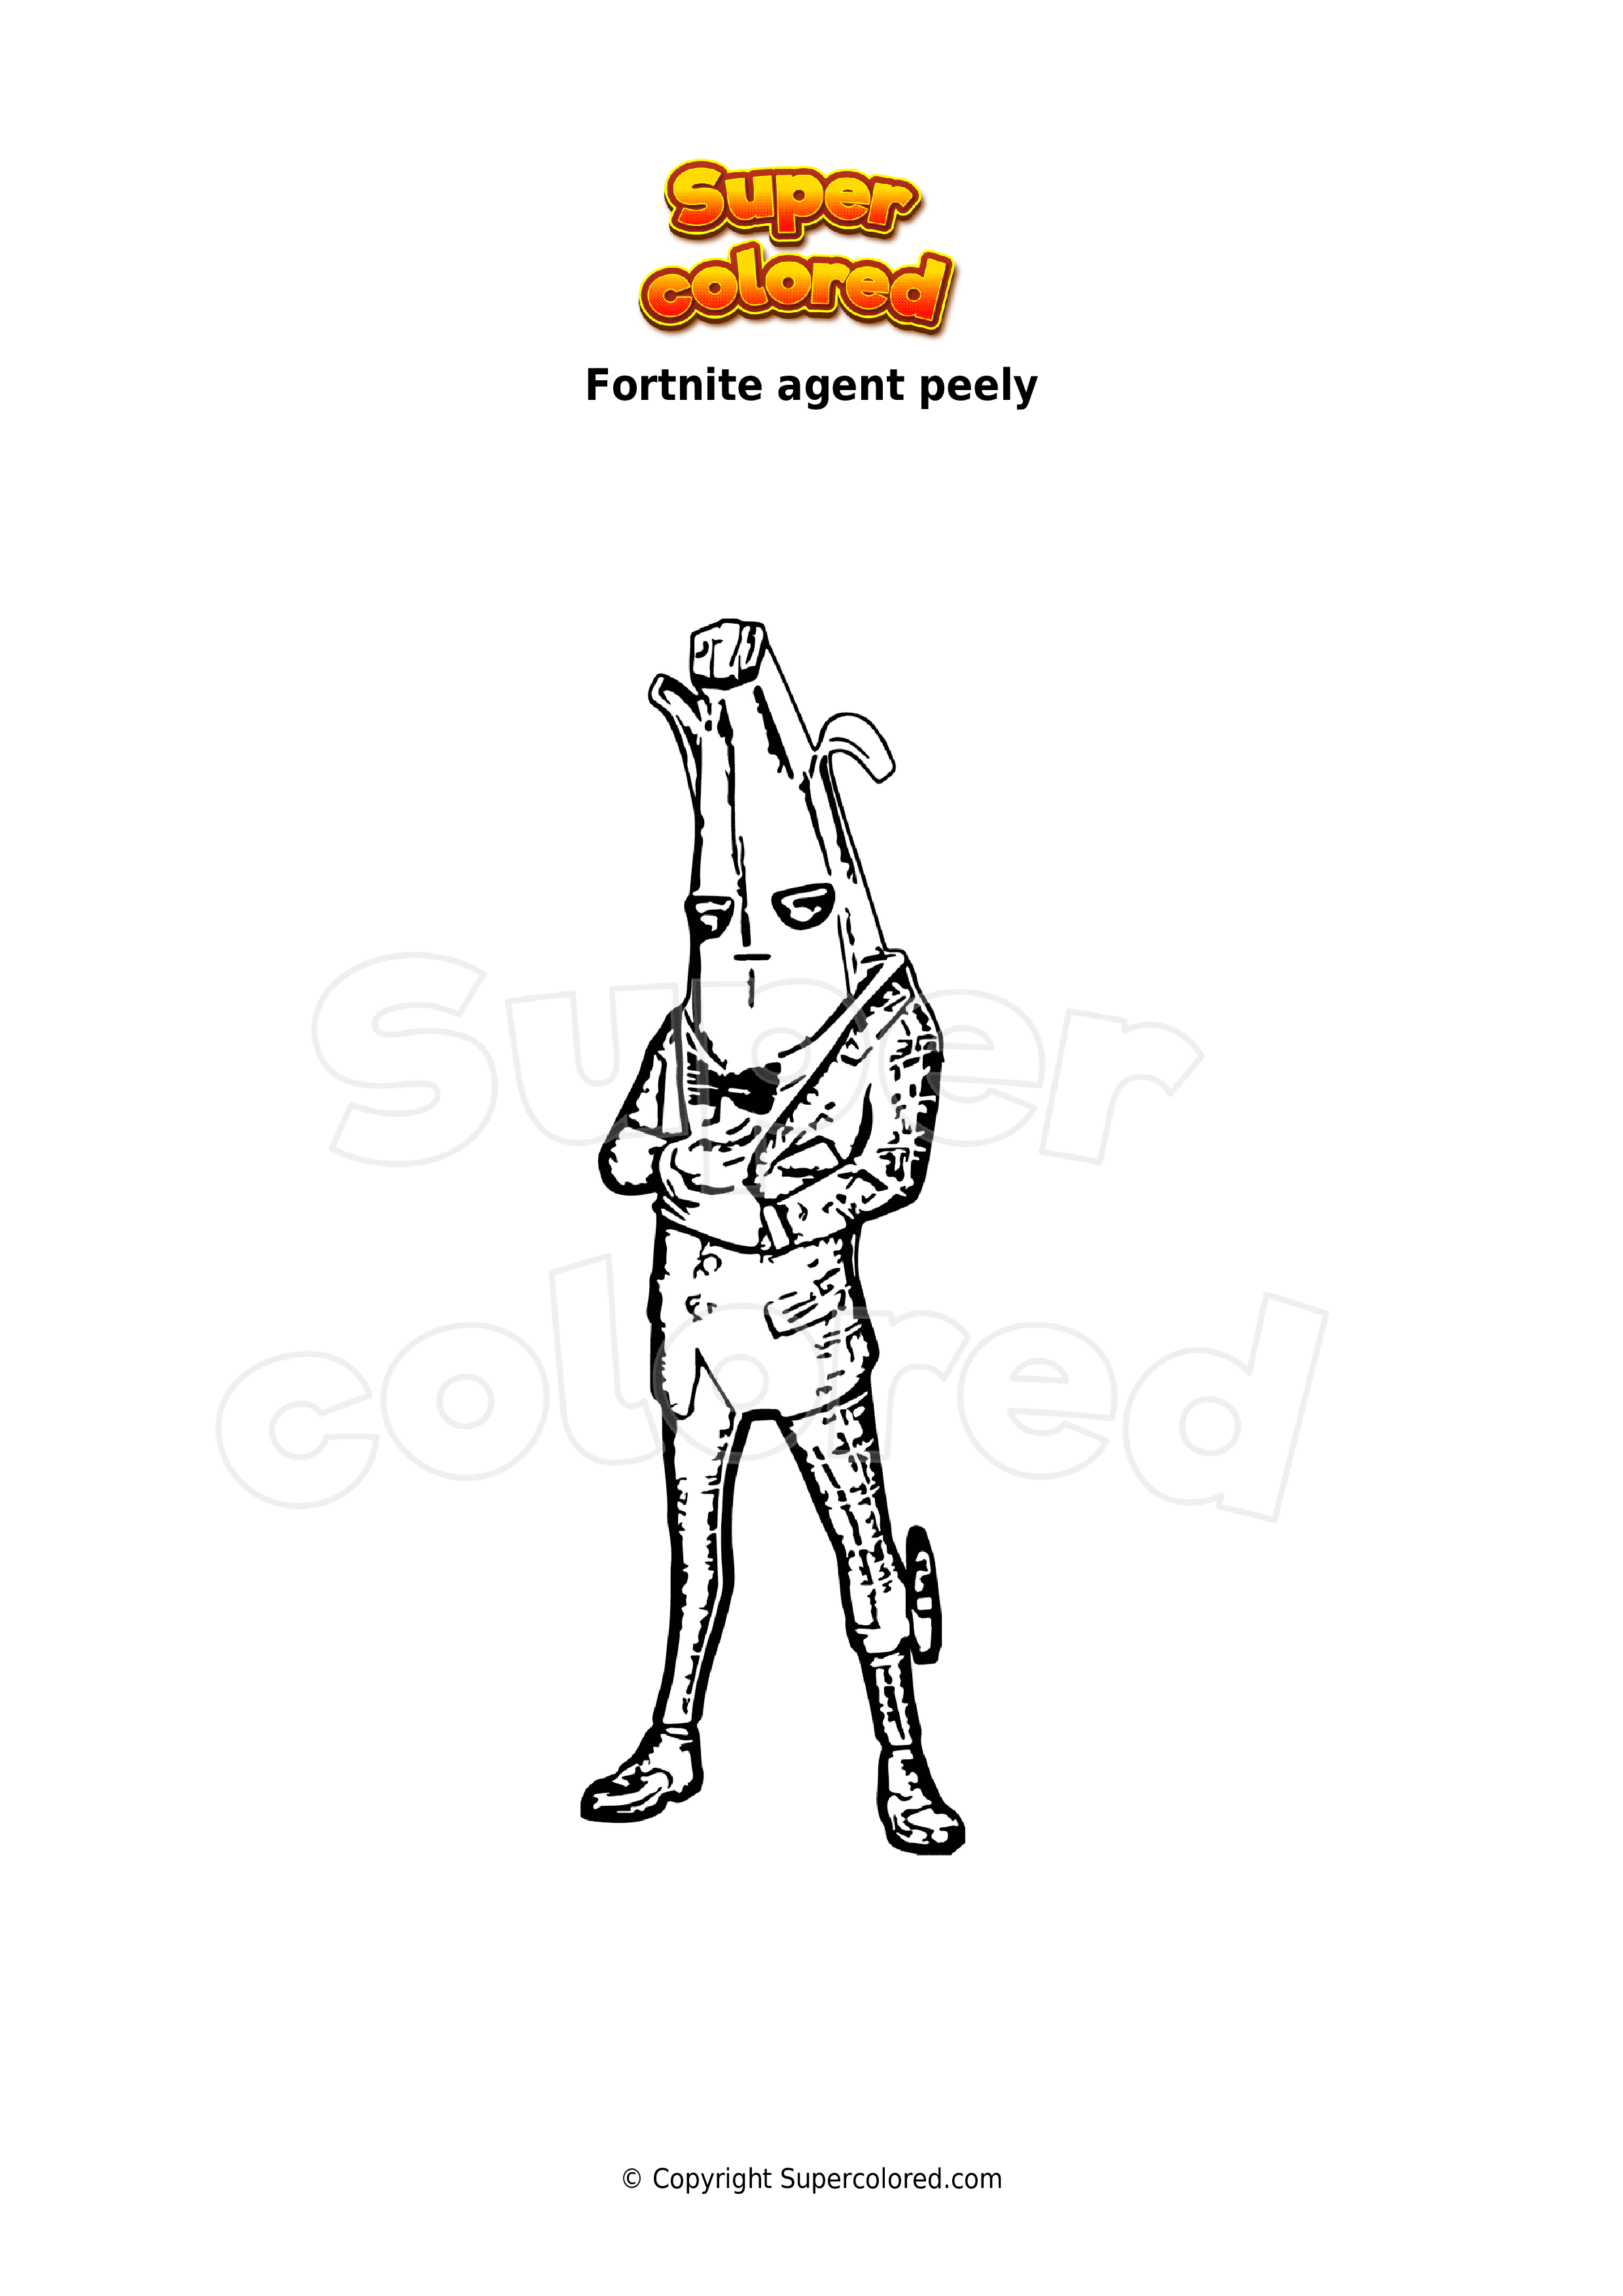 Coloring page Fortnite agent peely - Supercolored.com